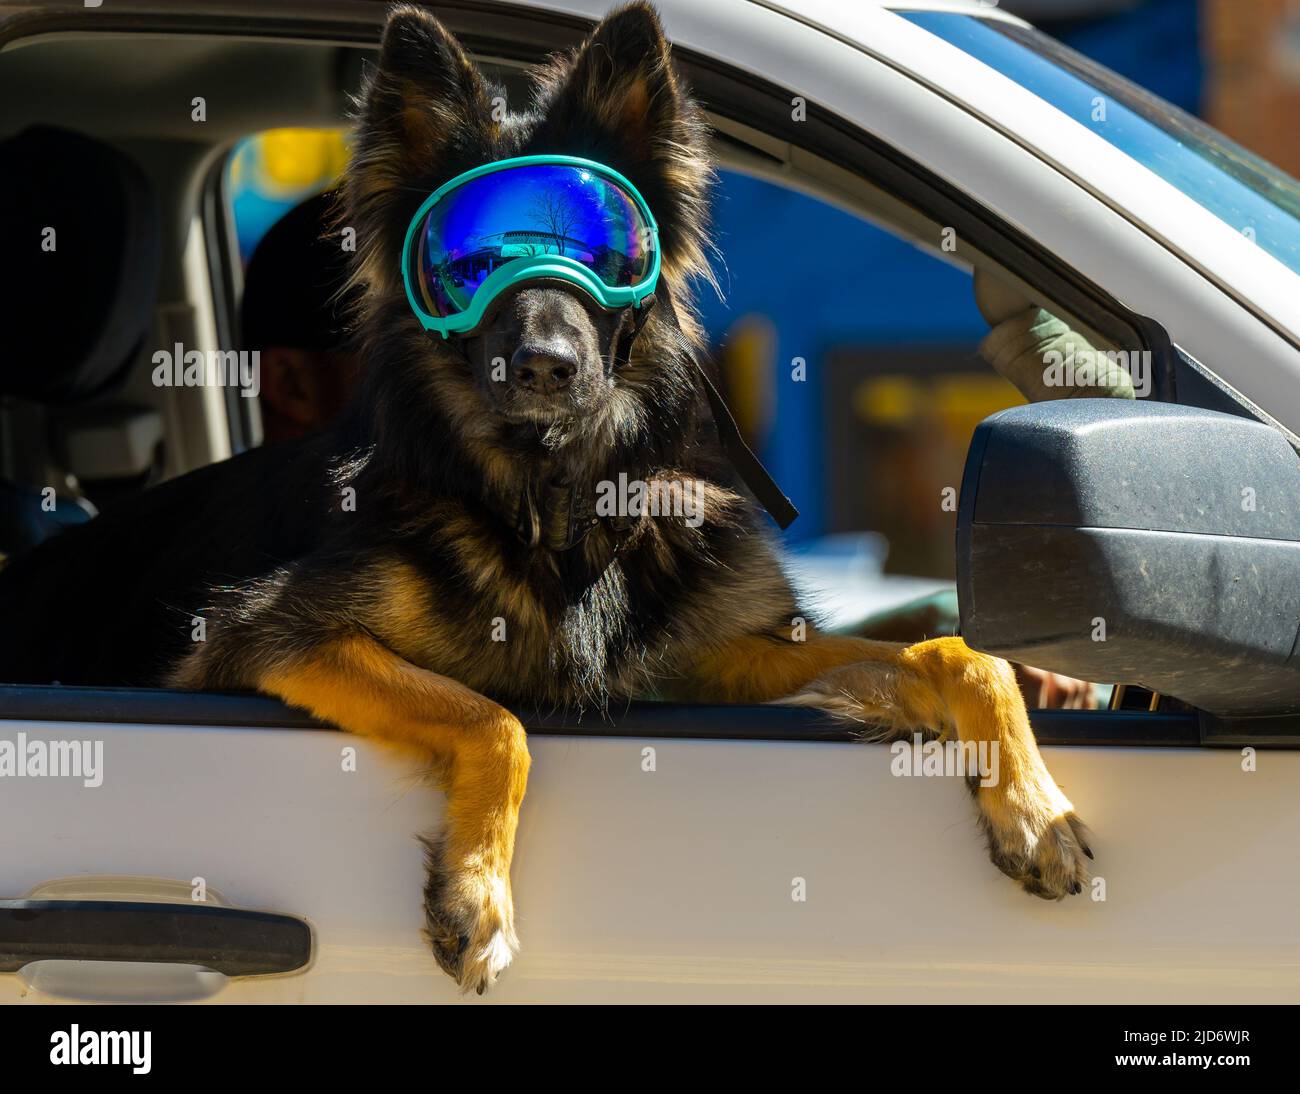 Portrait of a dog riding in white truck wearing tinted ski goggles with paws and legs hanging out of passenger window. Stock Photo